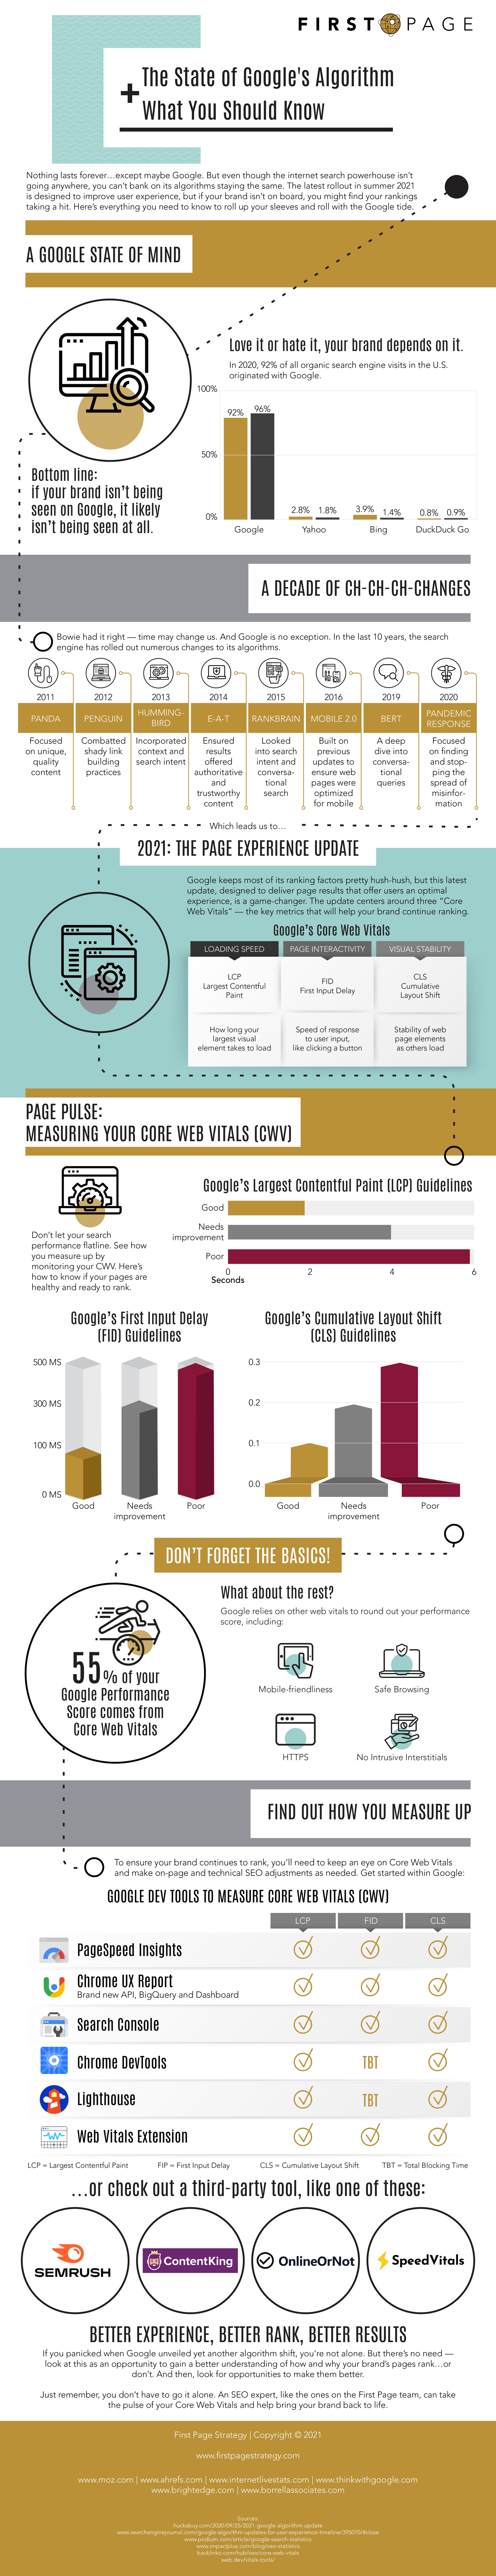 The State of Googles Algorithm + What You Should Know [INFOGRAPHIC}